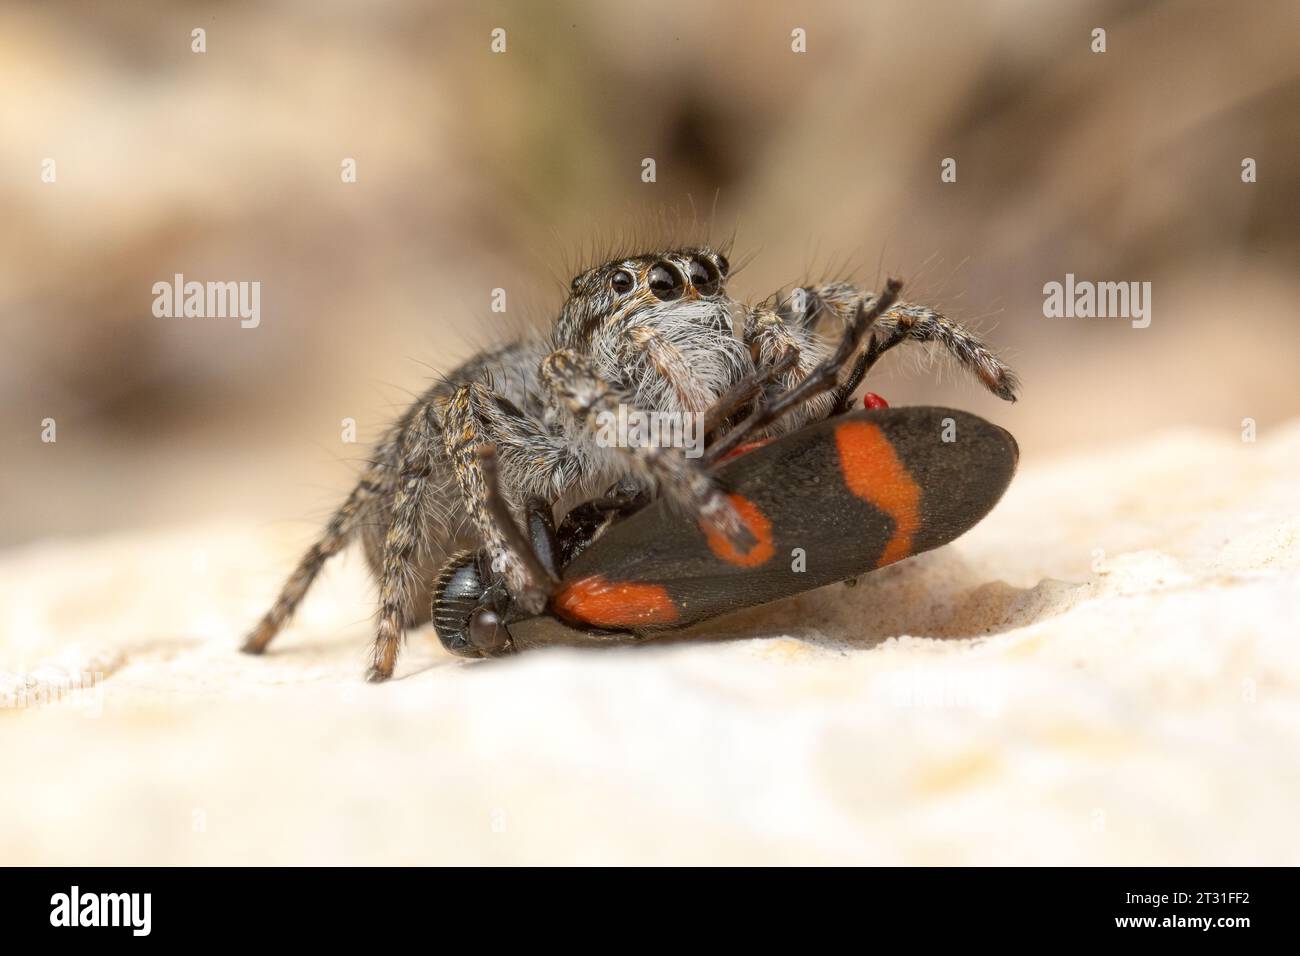 Red-bellied Jumping Spider, female, feeding on plant hopper, Corfu, Greece. Stock Photo